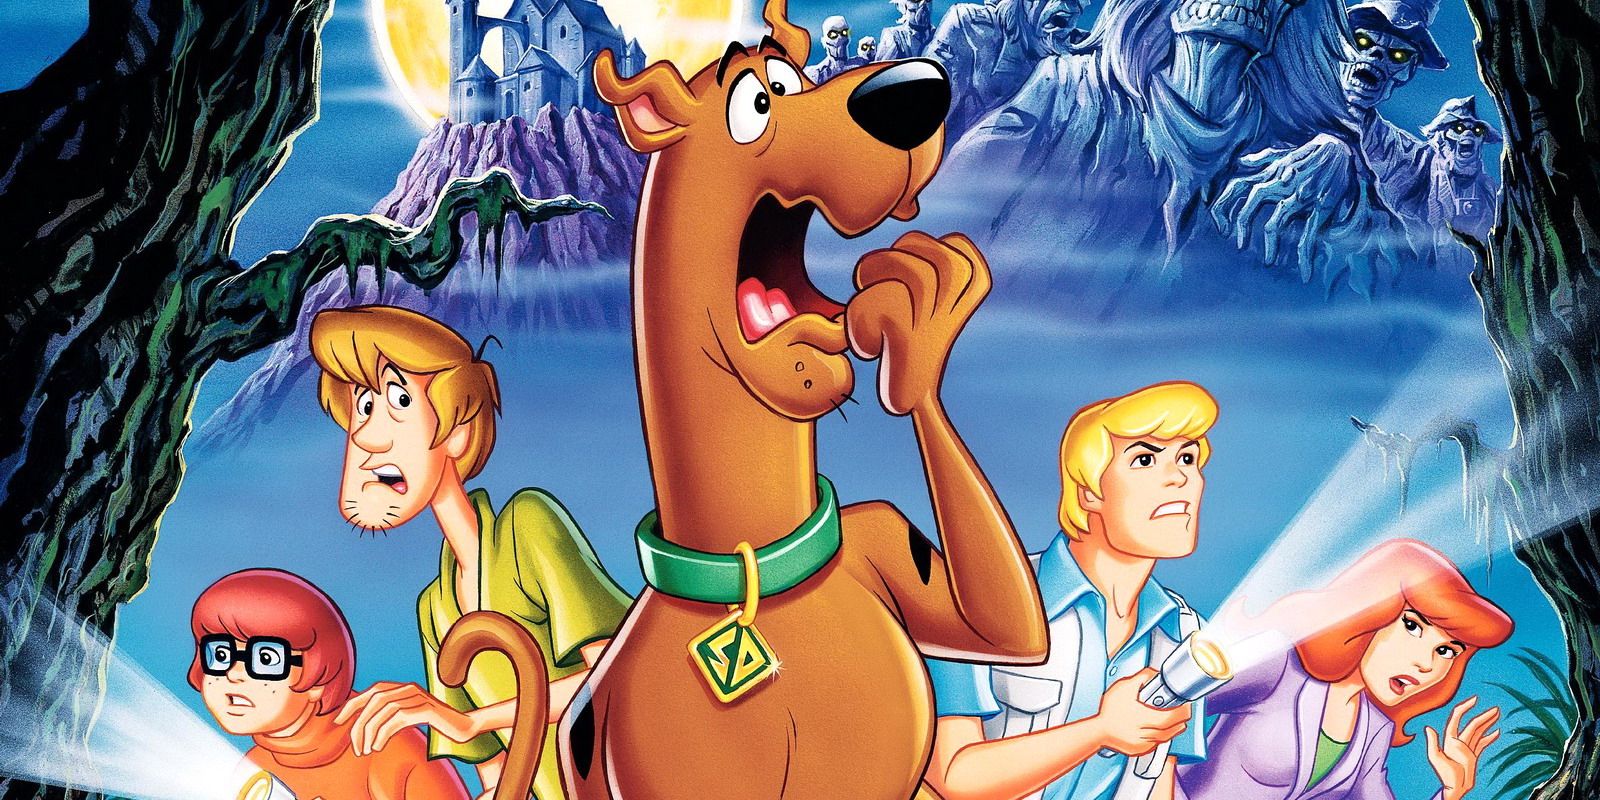 Scooby-Doo 2018 animated movie lands its directors